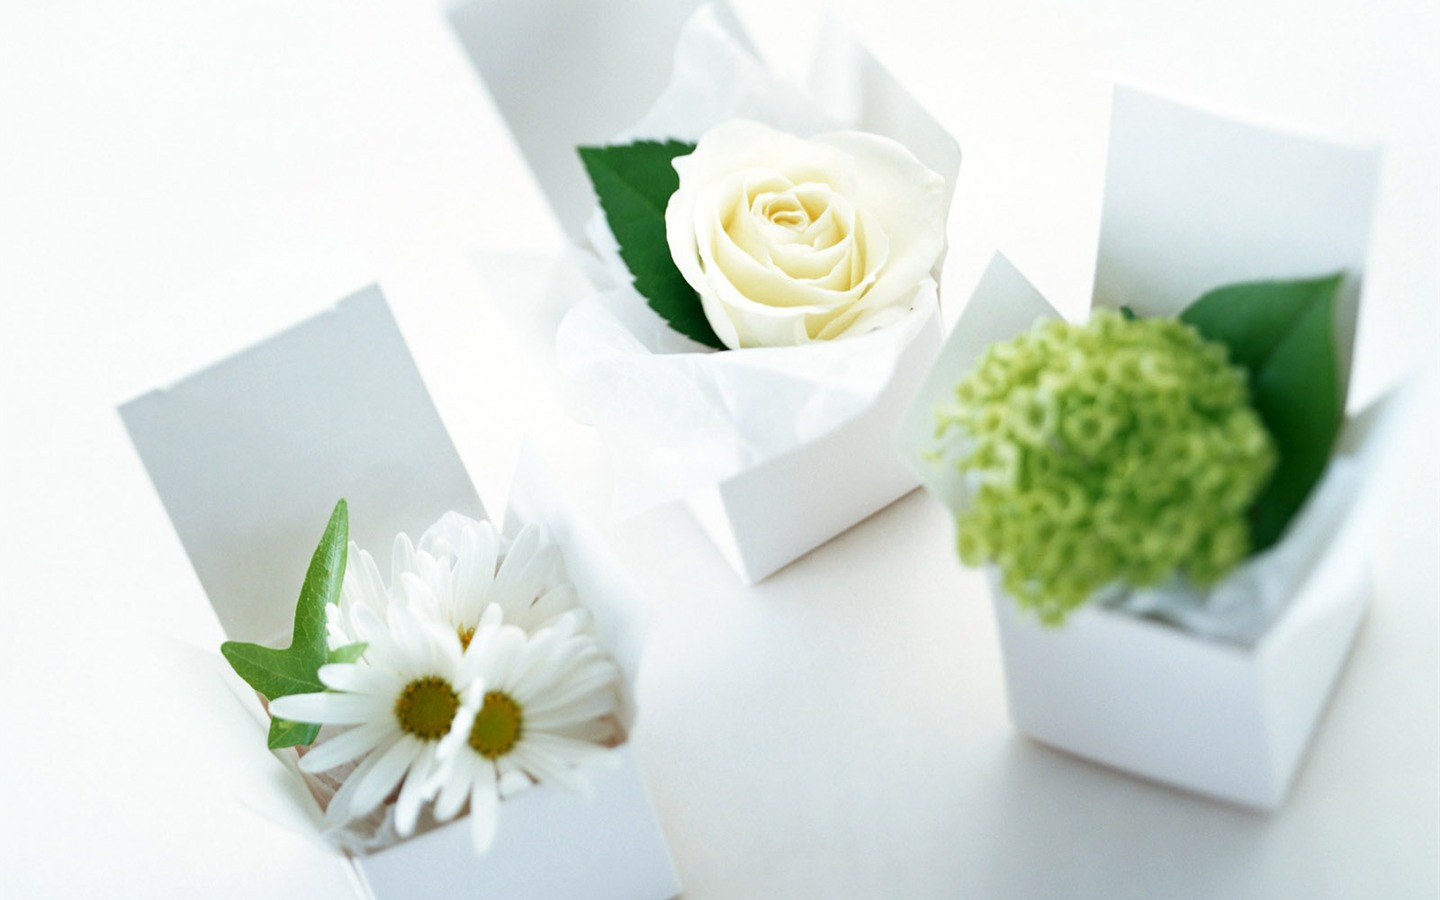 Flowers and gifts wallpaper (1) #16 - 1440x900